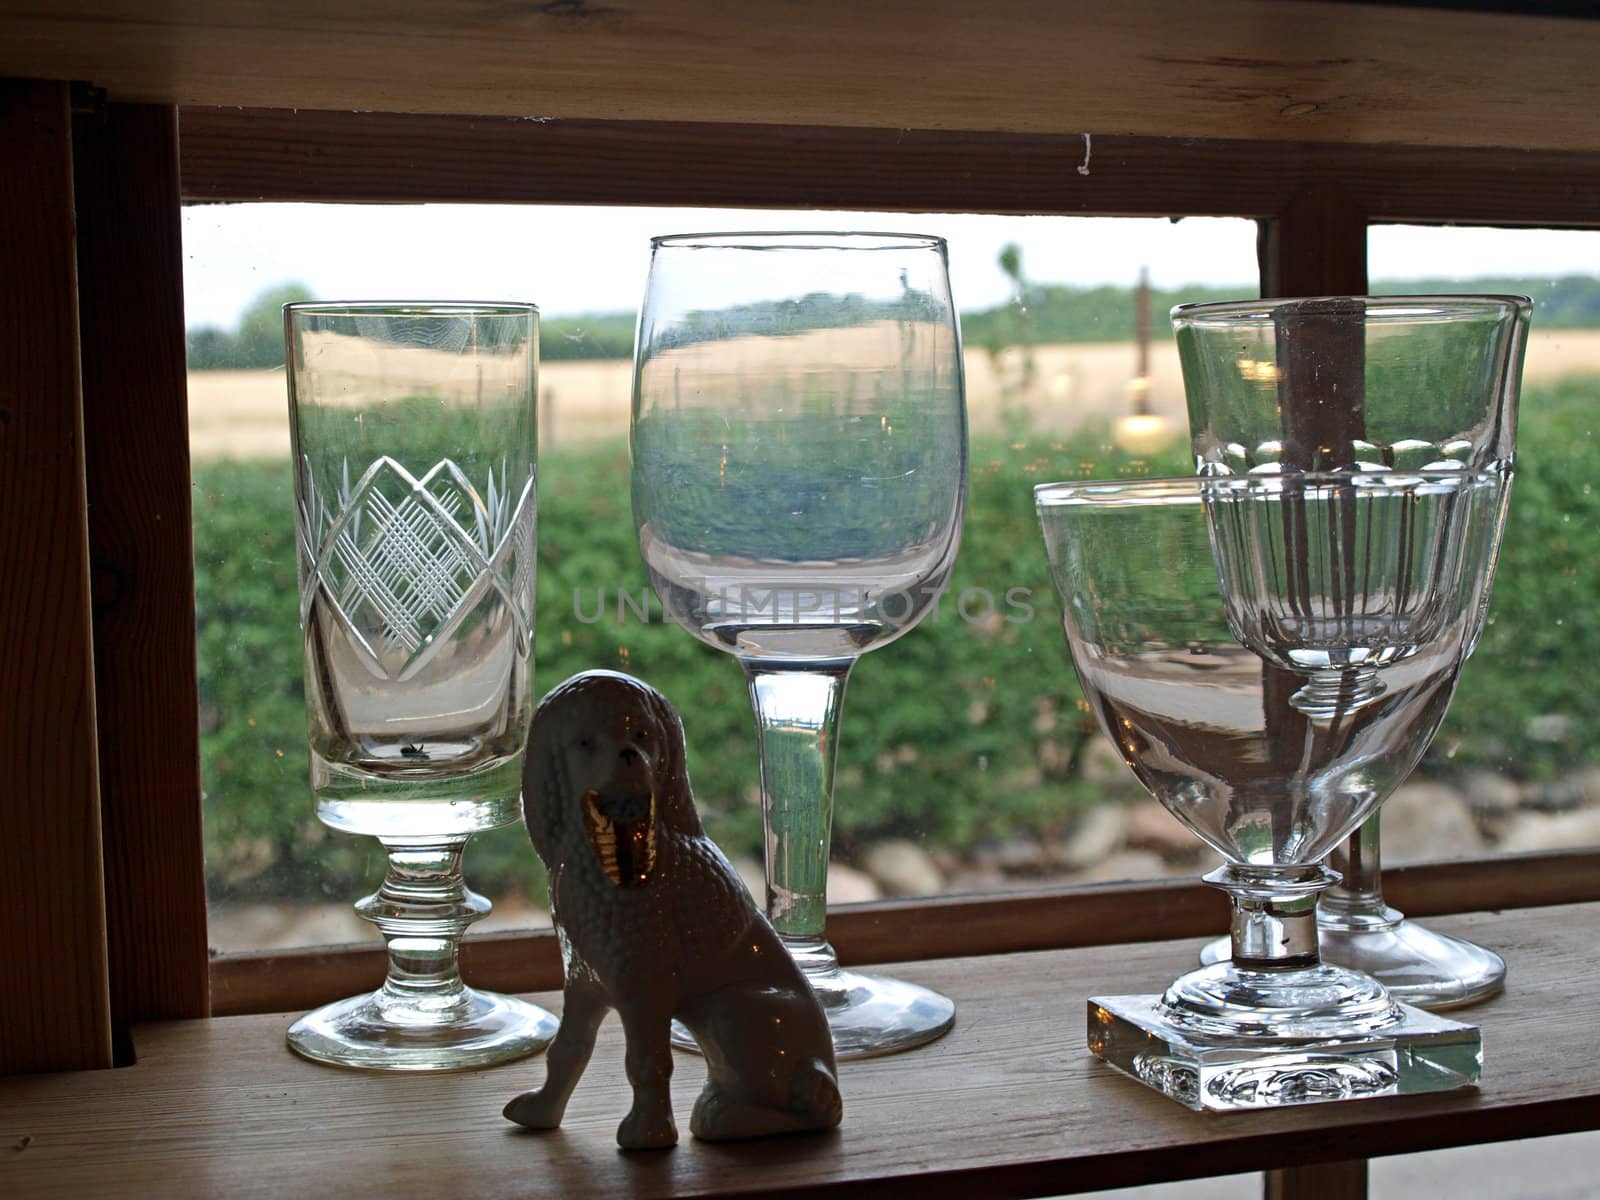 Beautiful decorative wineglasses on display by Ronyzmbow